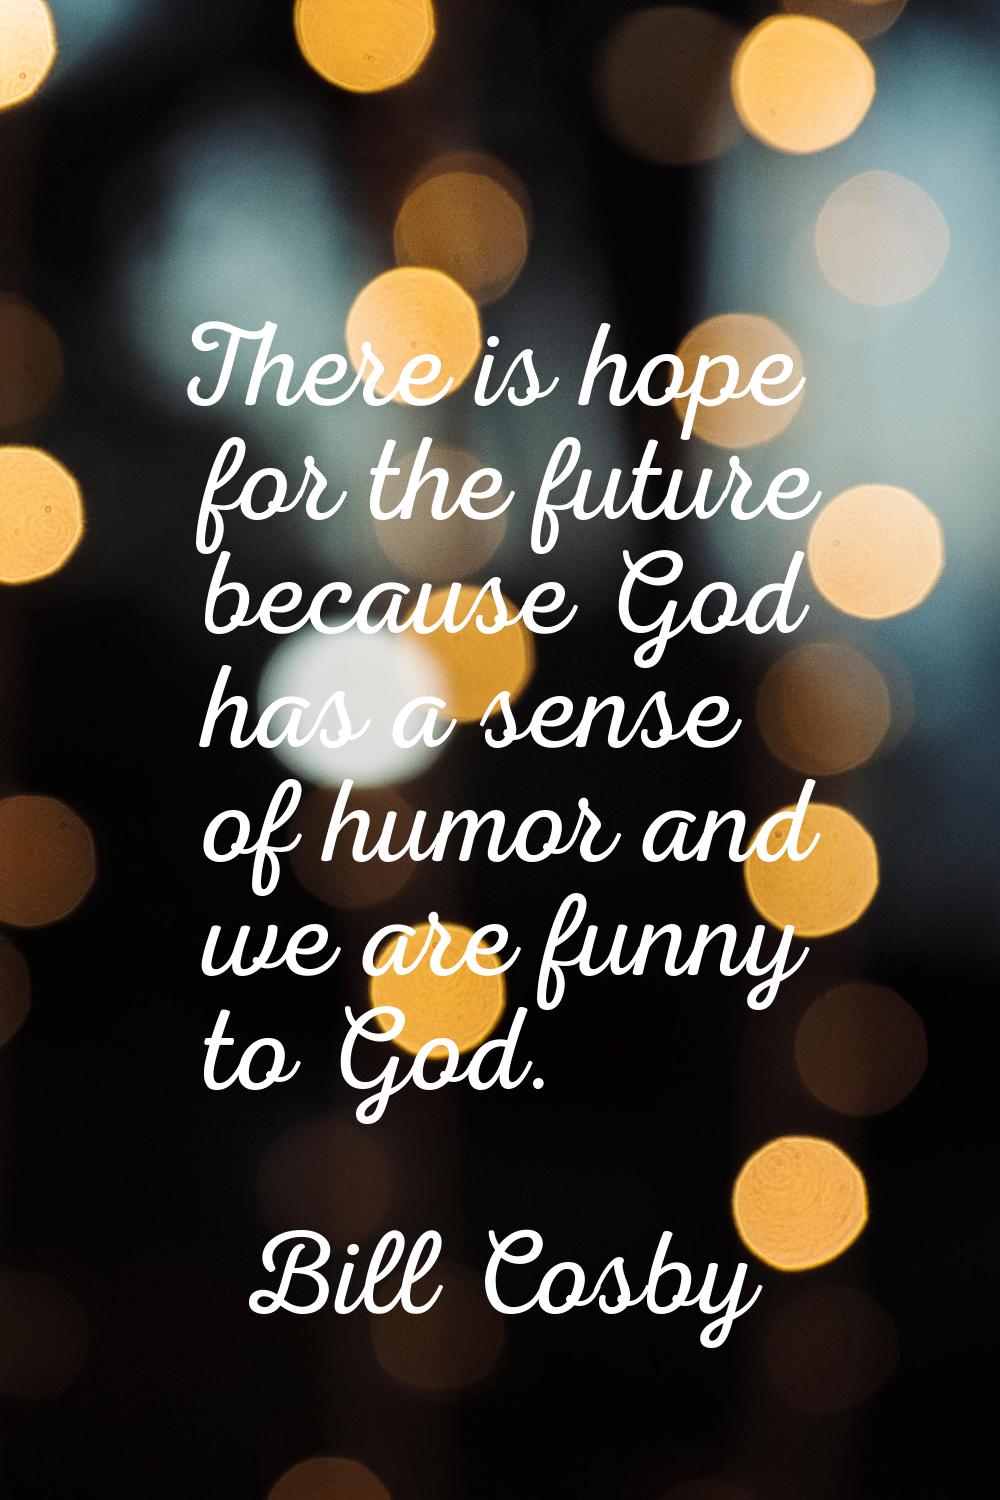 There is hope for the future because God has a sense of humor and we are funny to God.